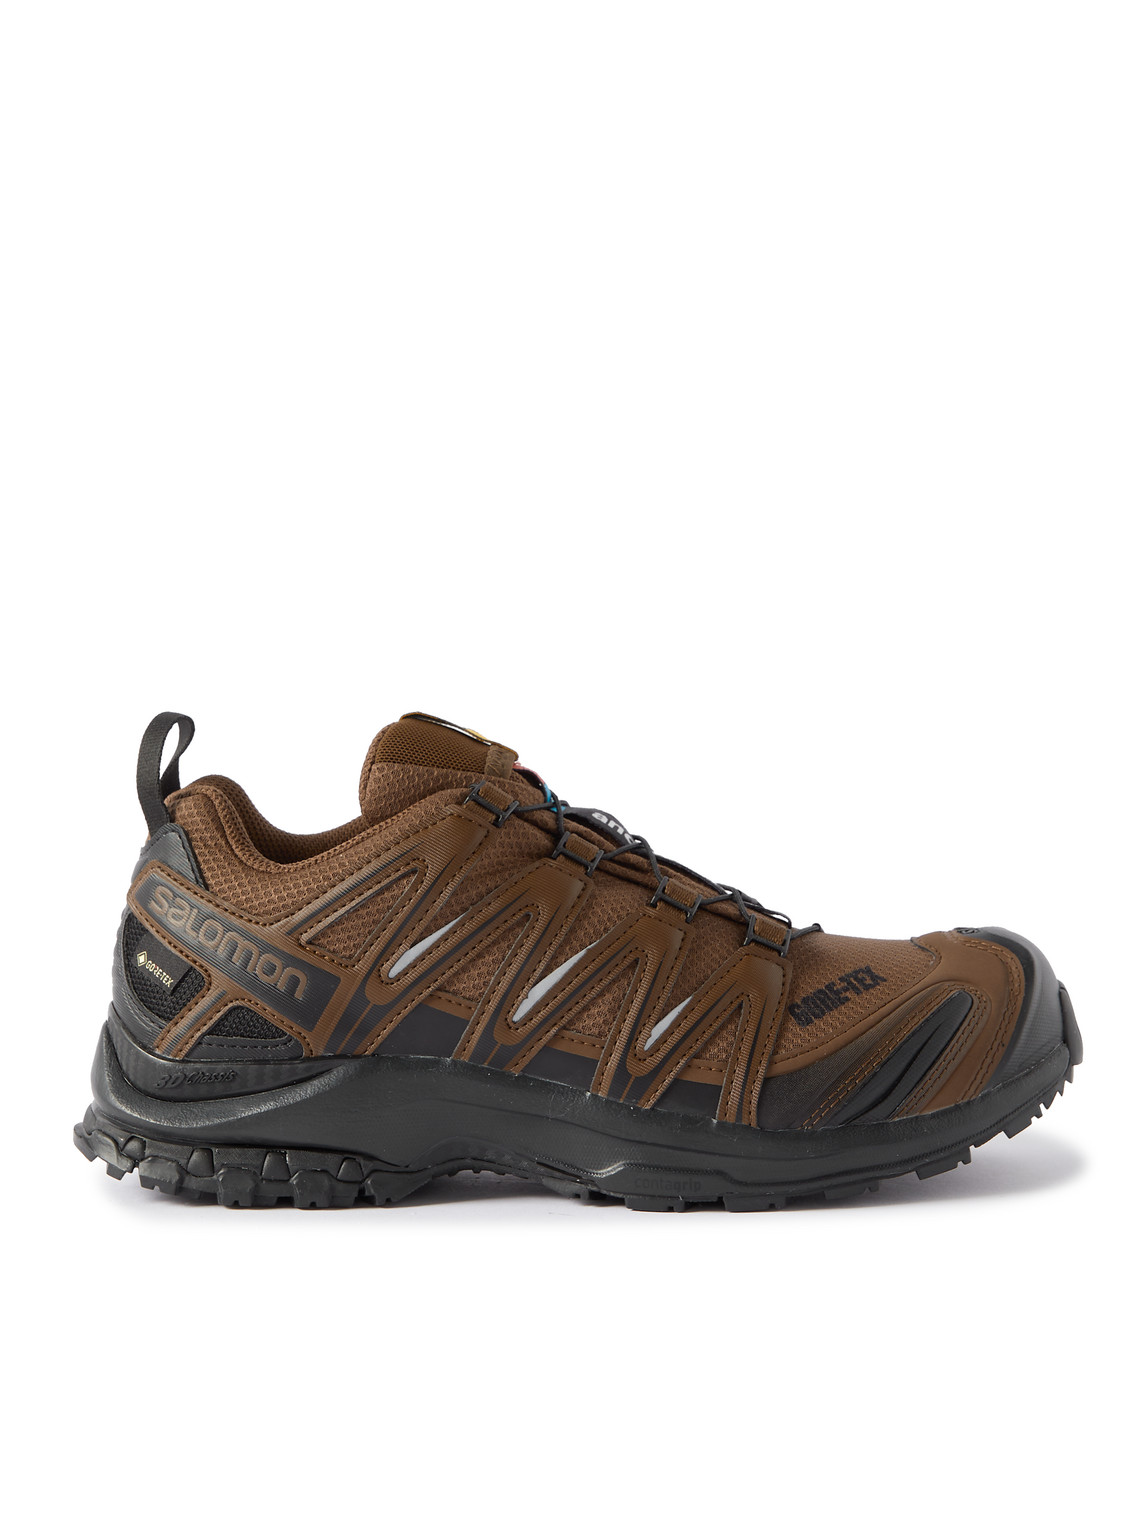 AND WANDER SALOMON XA PRO 3D RUBBER-TRIMMED GORE-TEX® MESH TRAIL RUNNING SNEAKERS